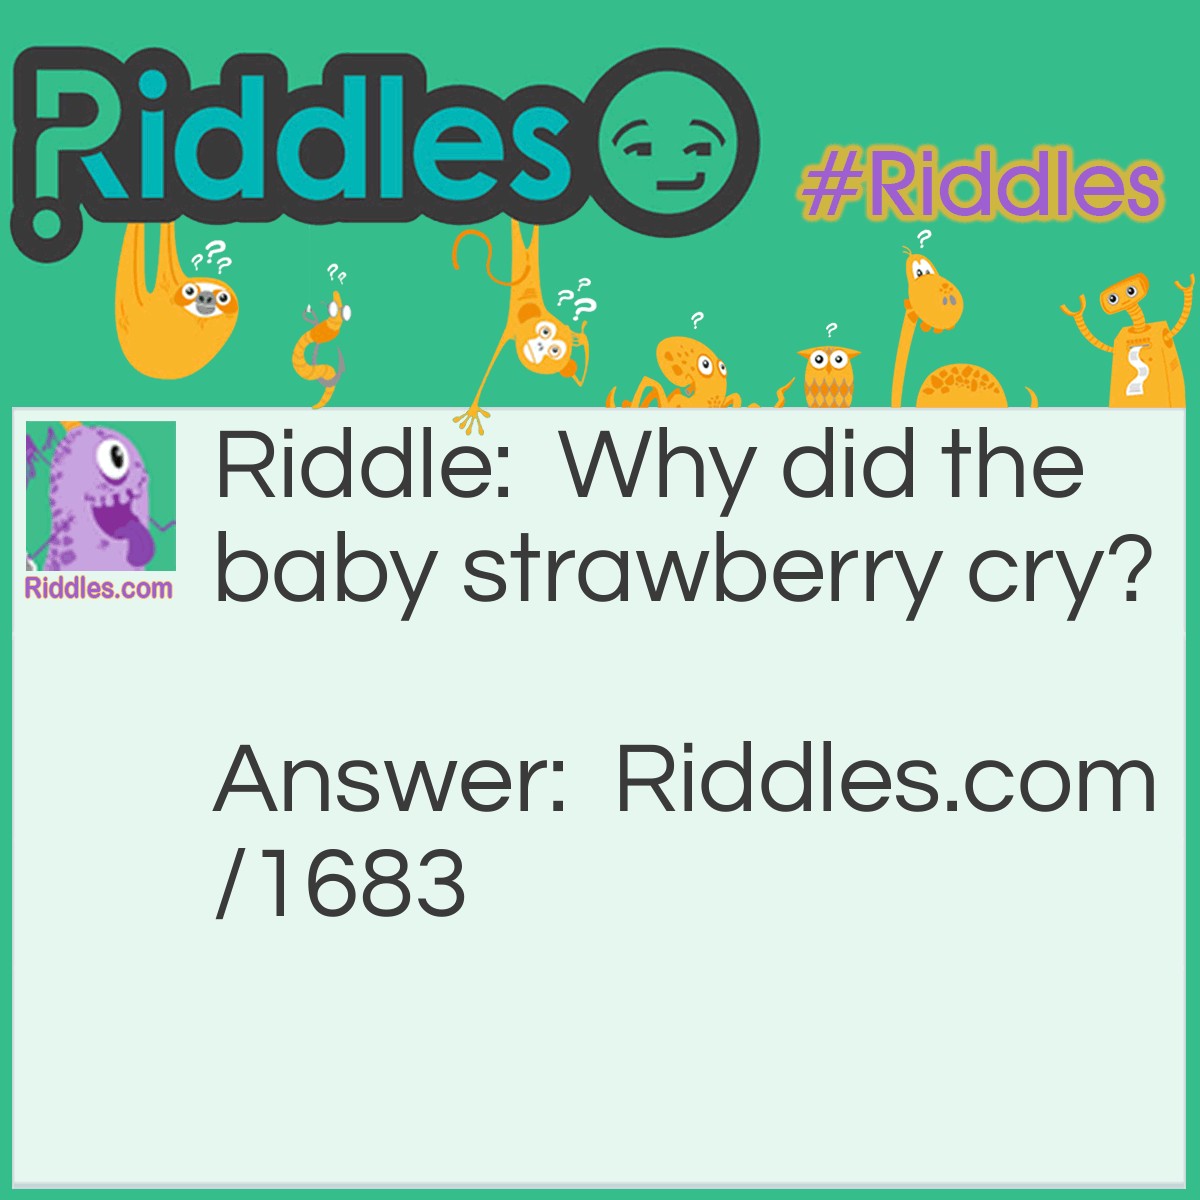 Riddle: Why did the baby strawberry cry? Answer: His parents were in a jam.